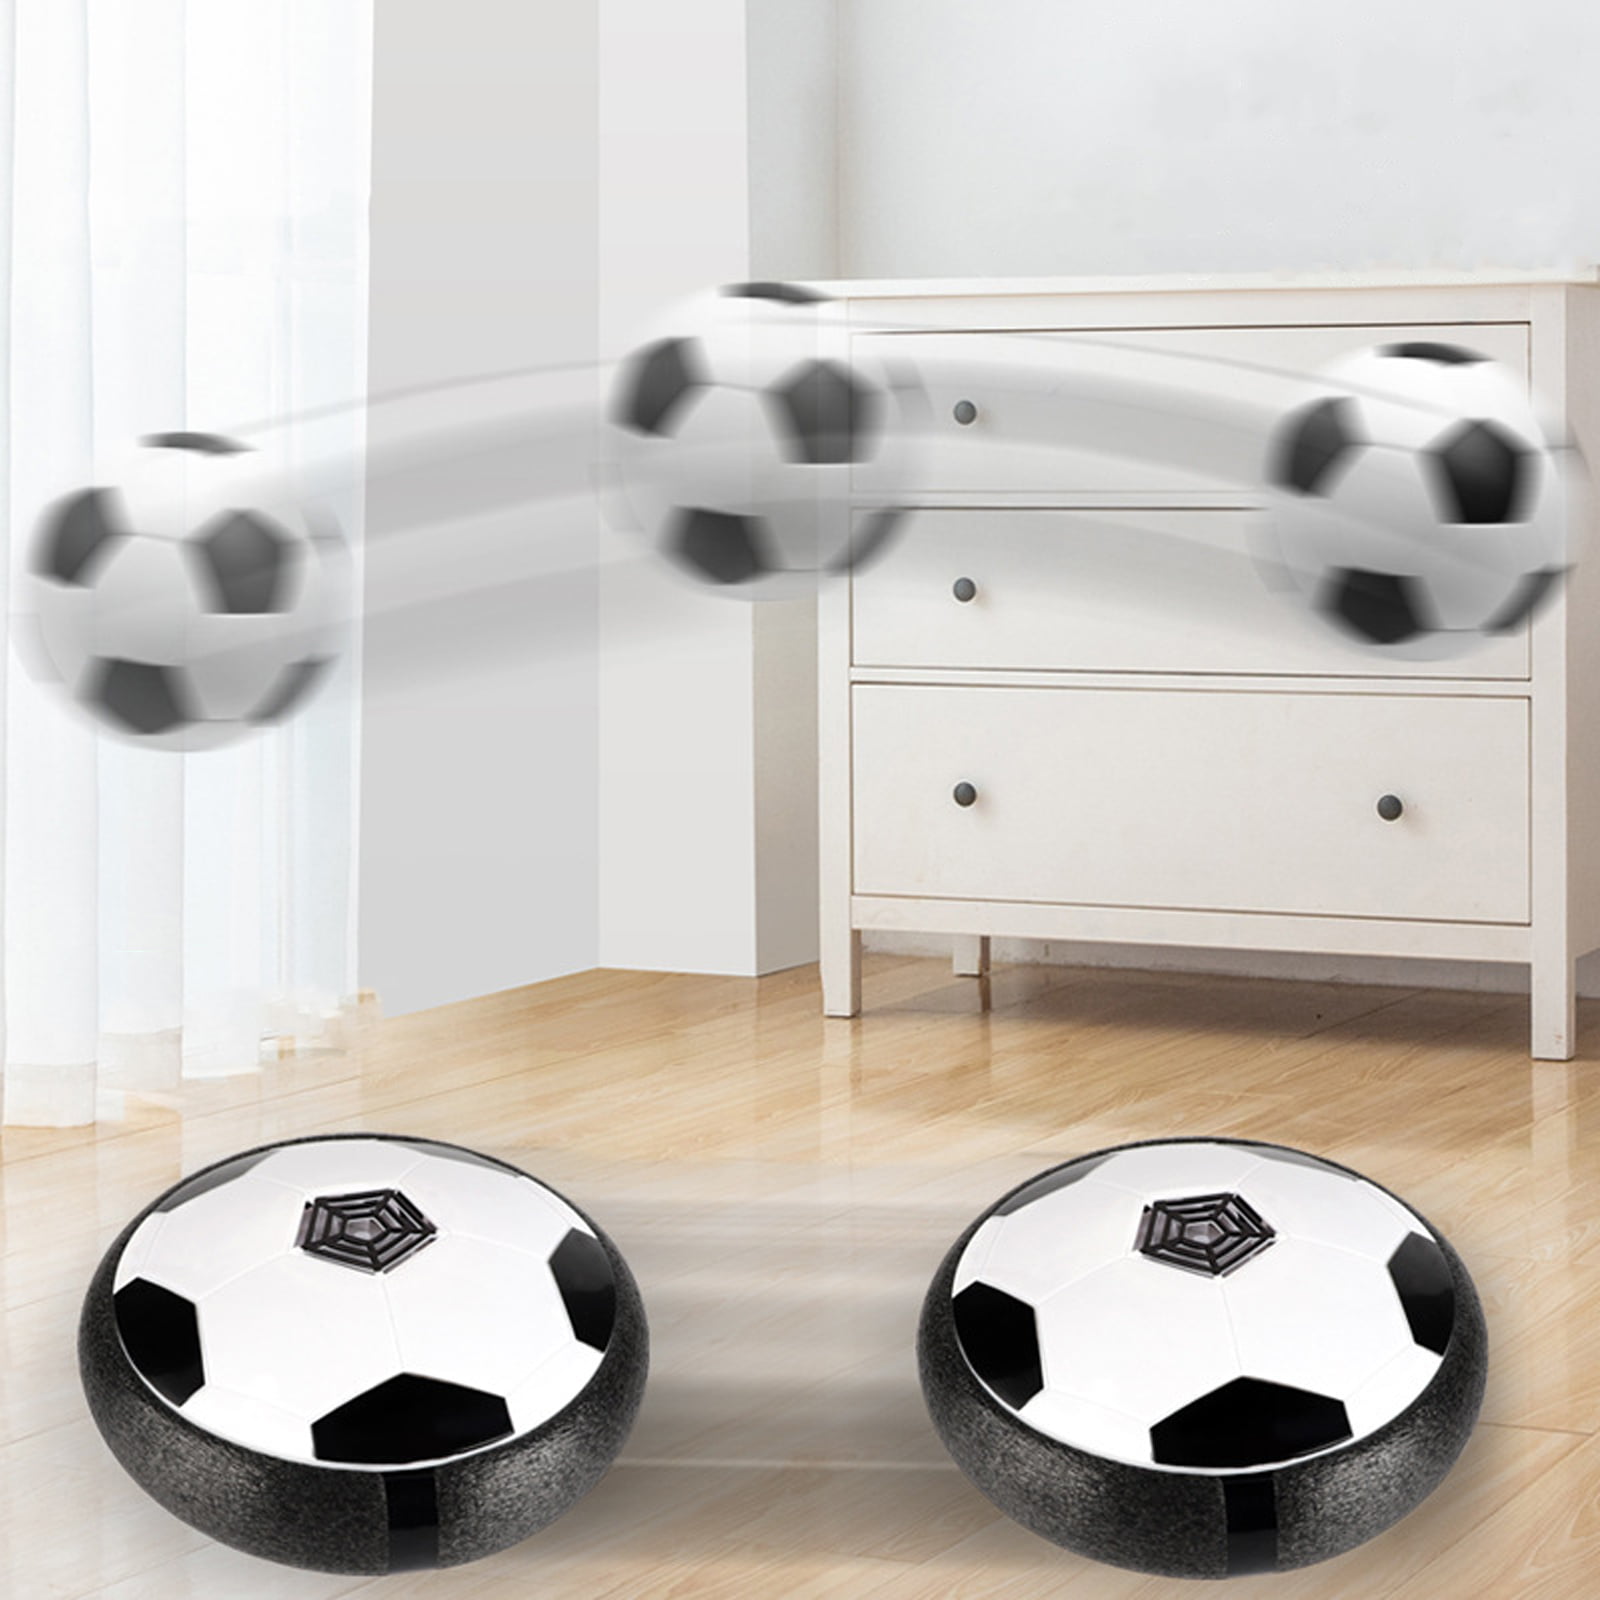  Hover Soccer Ball Christmas Stocking Stuffers for Kids Toys  Rechargeable Floating Football Set with 2 Goal Soccer LED Light Foam Bumper  Christmas Toys for Boys Girls Indoor Outdoor Sport Games 